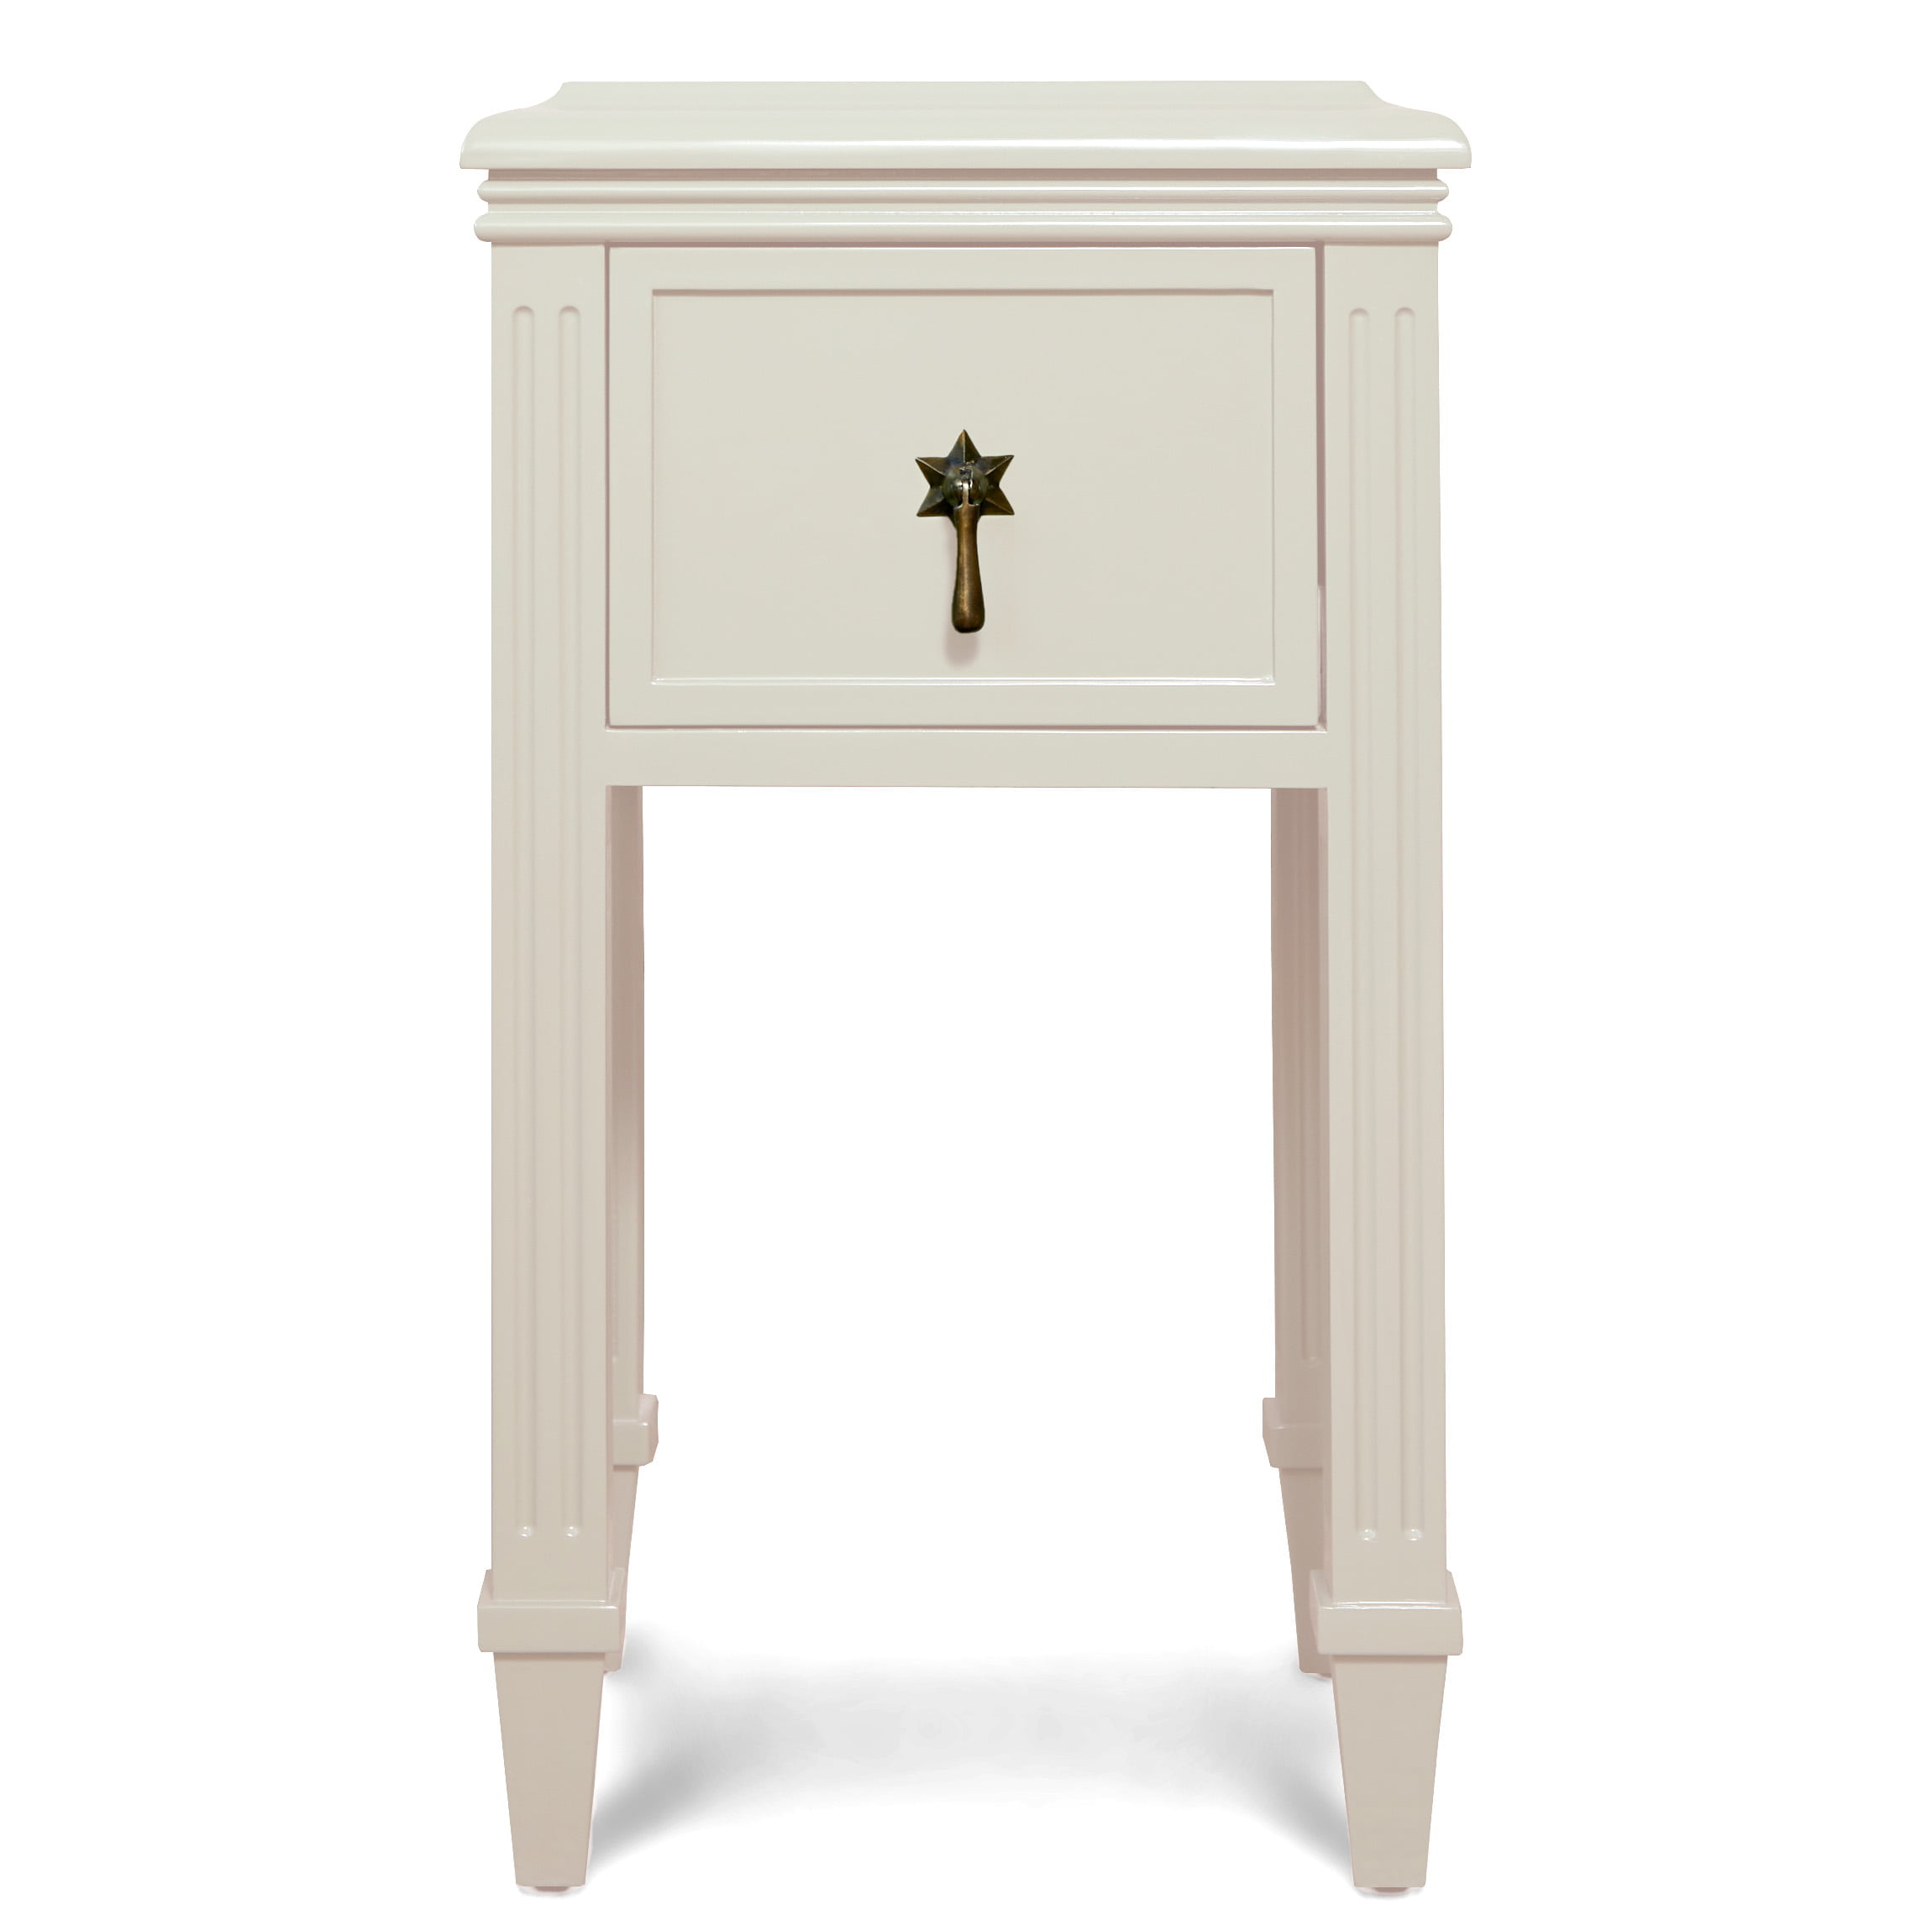 A petite white-coloured wooden chest of drawer with a star-shaped pull handle.